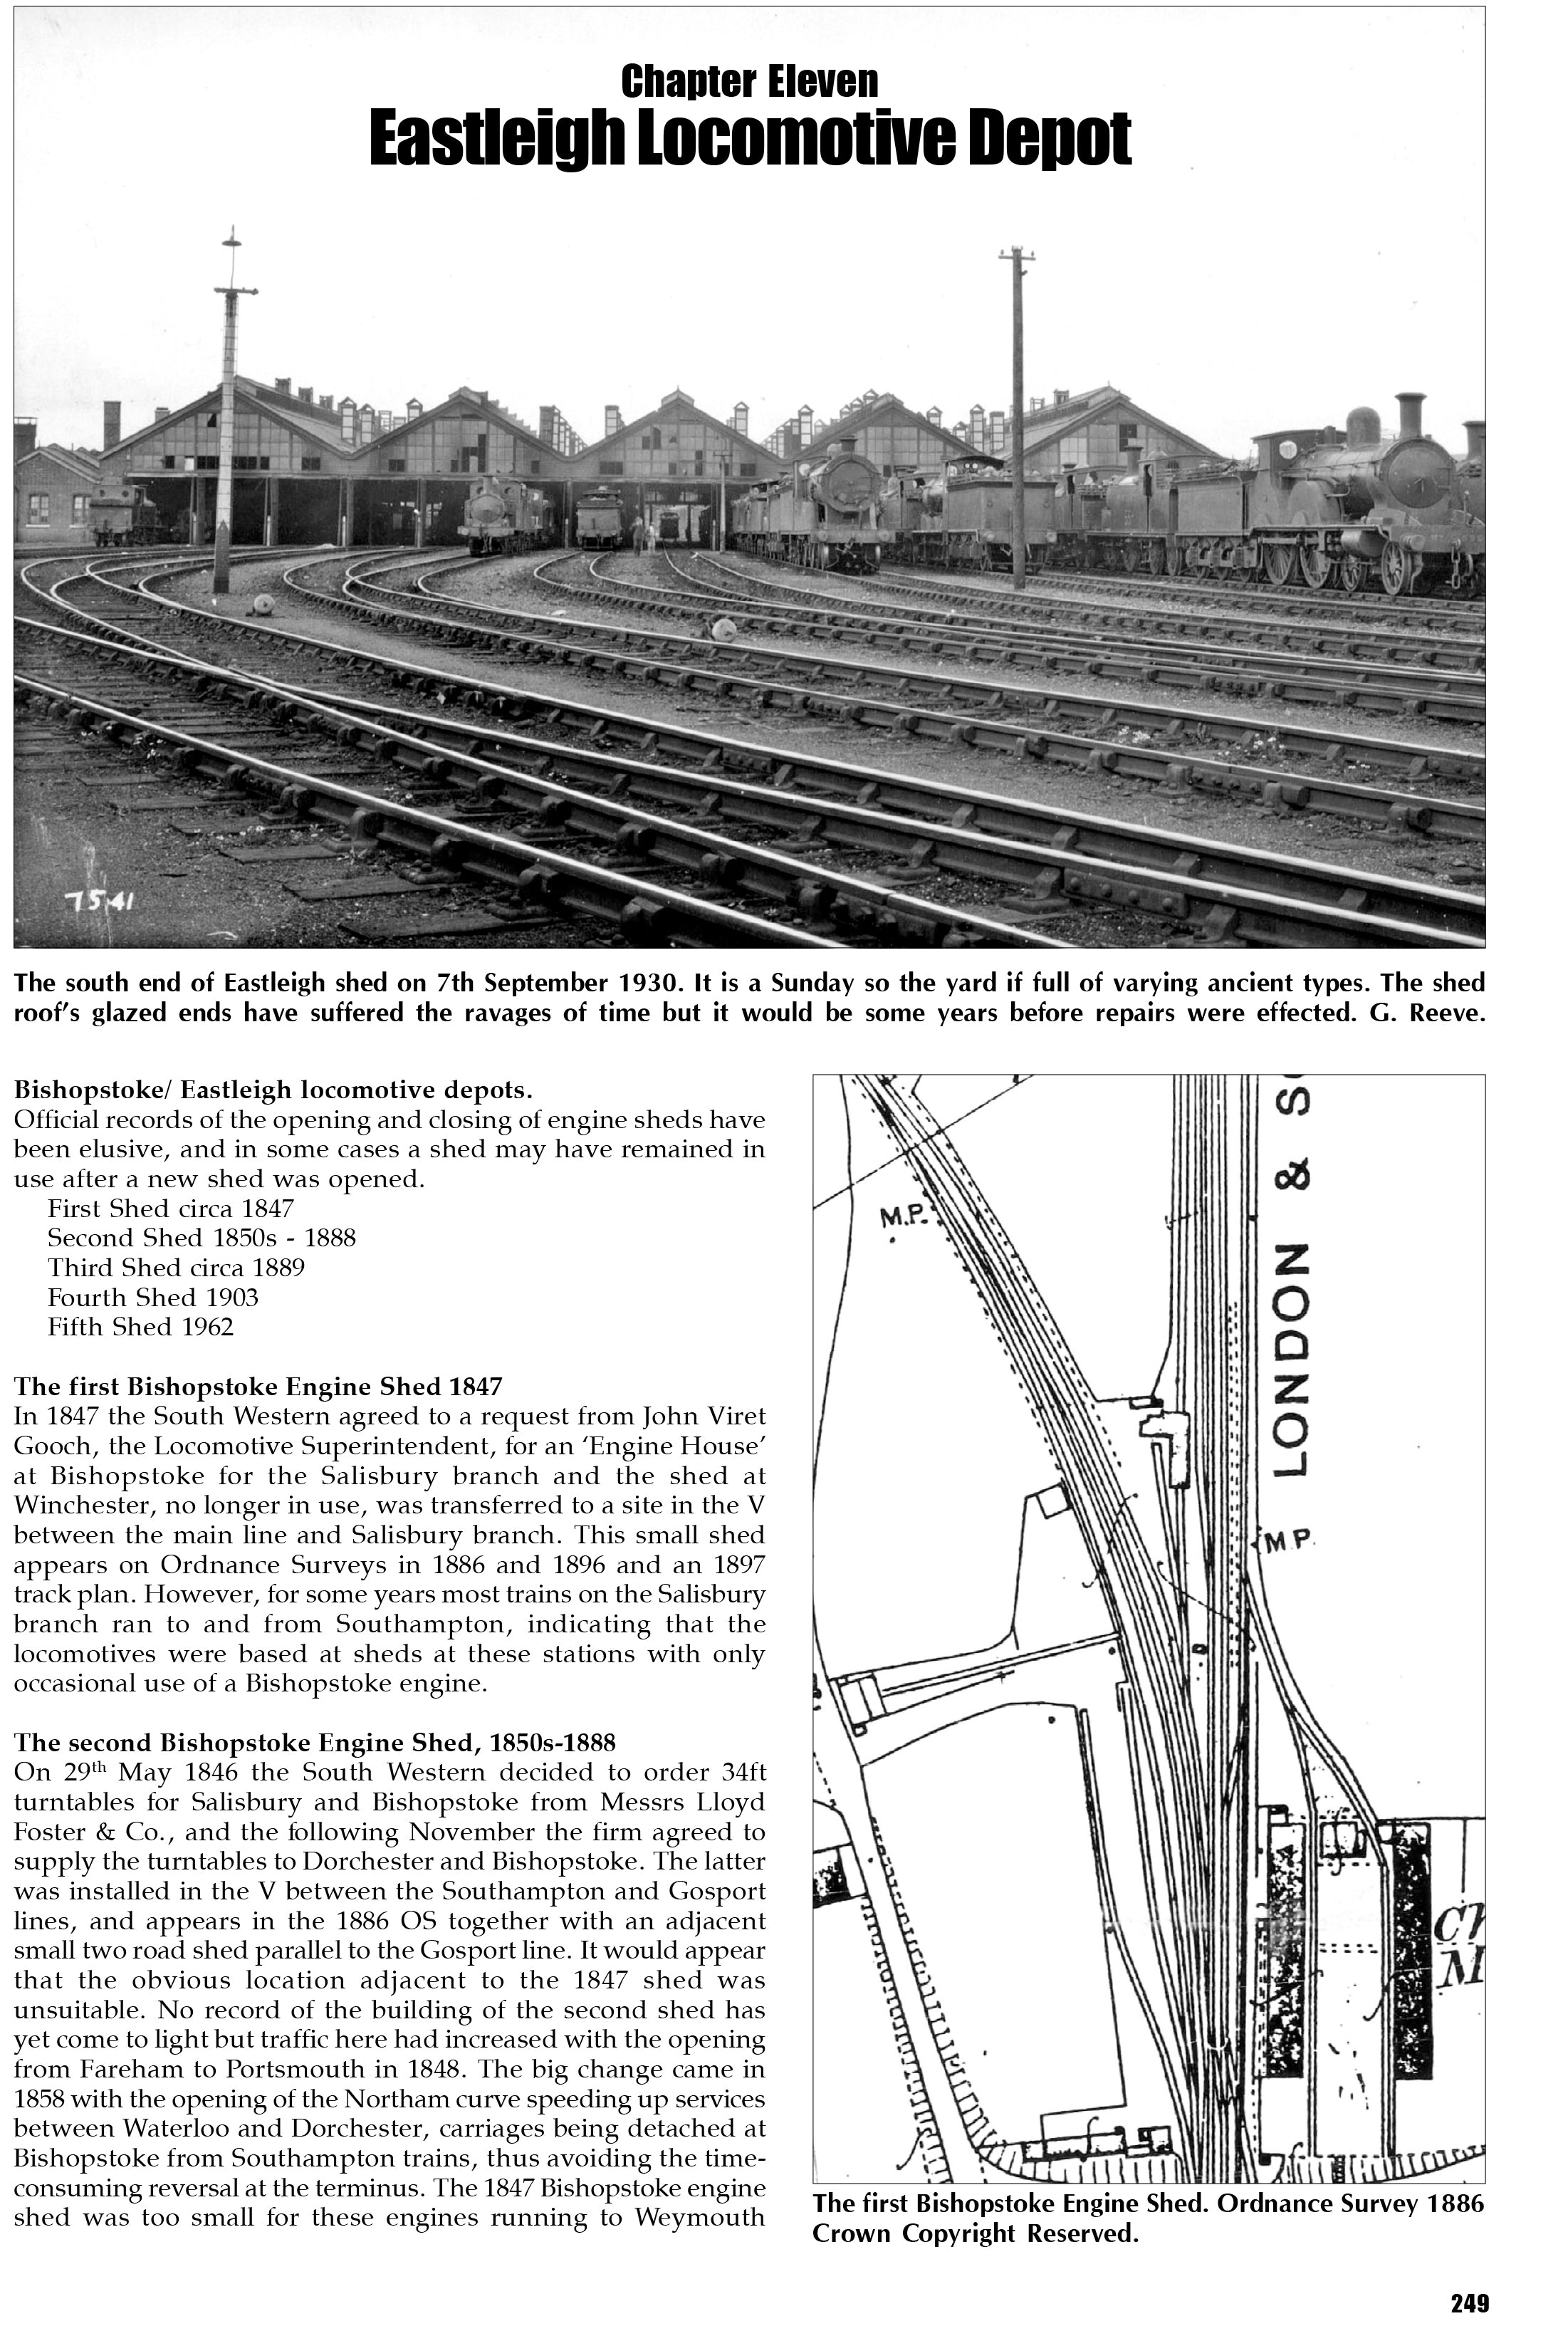 Main Line to The South - Part 2: St. Cross (Winchester) to Eastleigh and Swaythling